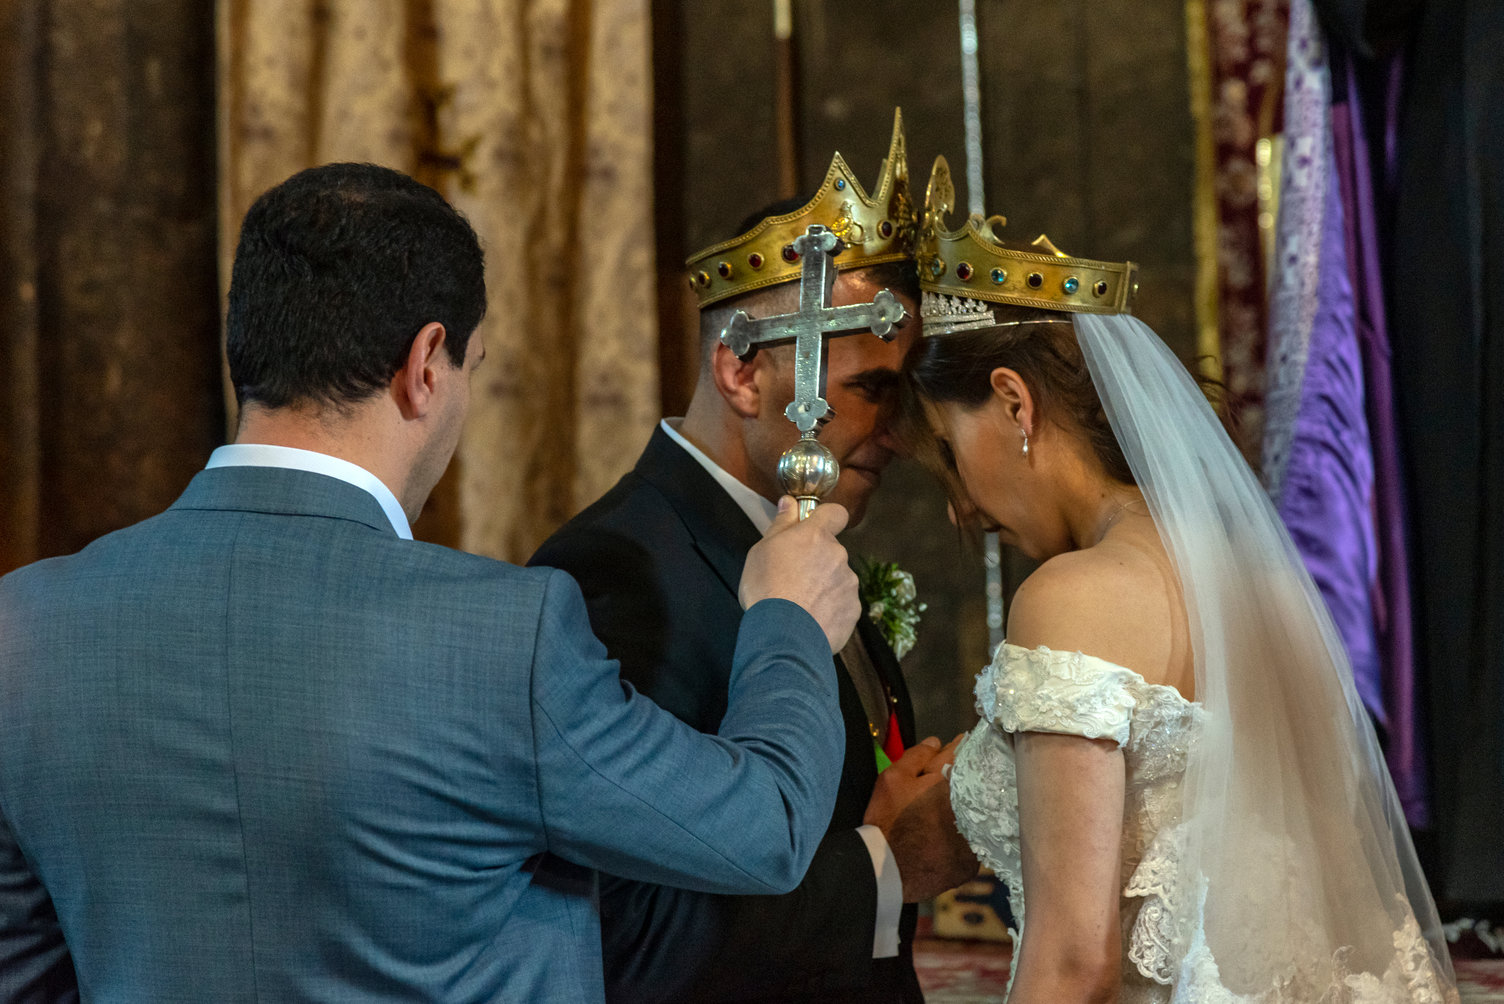 Who pays for an armenian wedding?